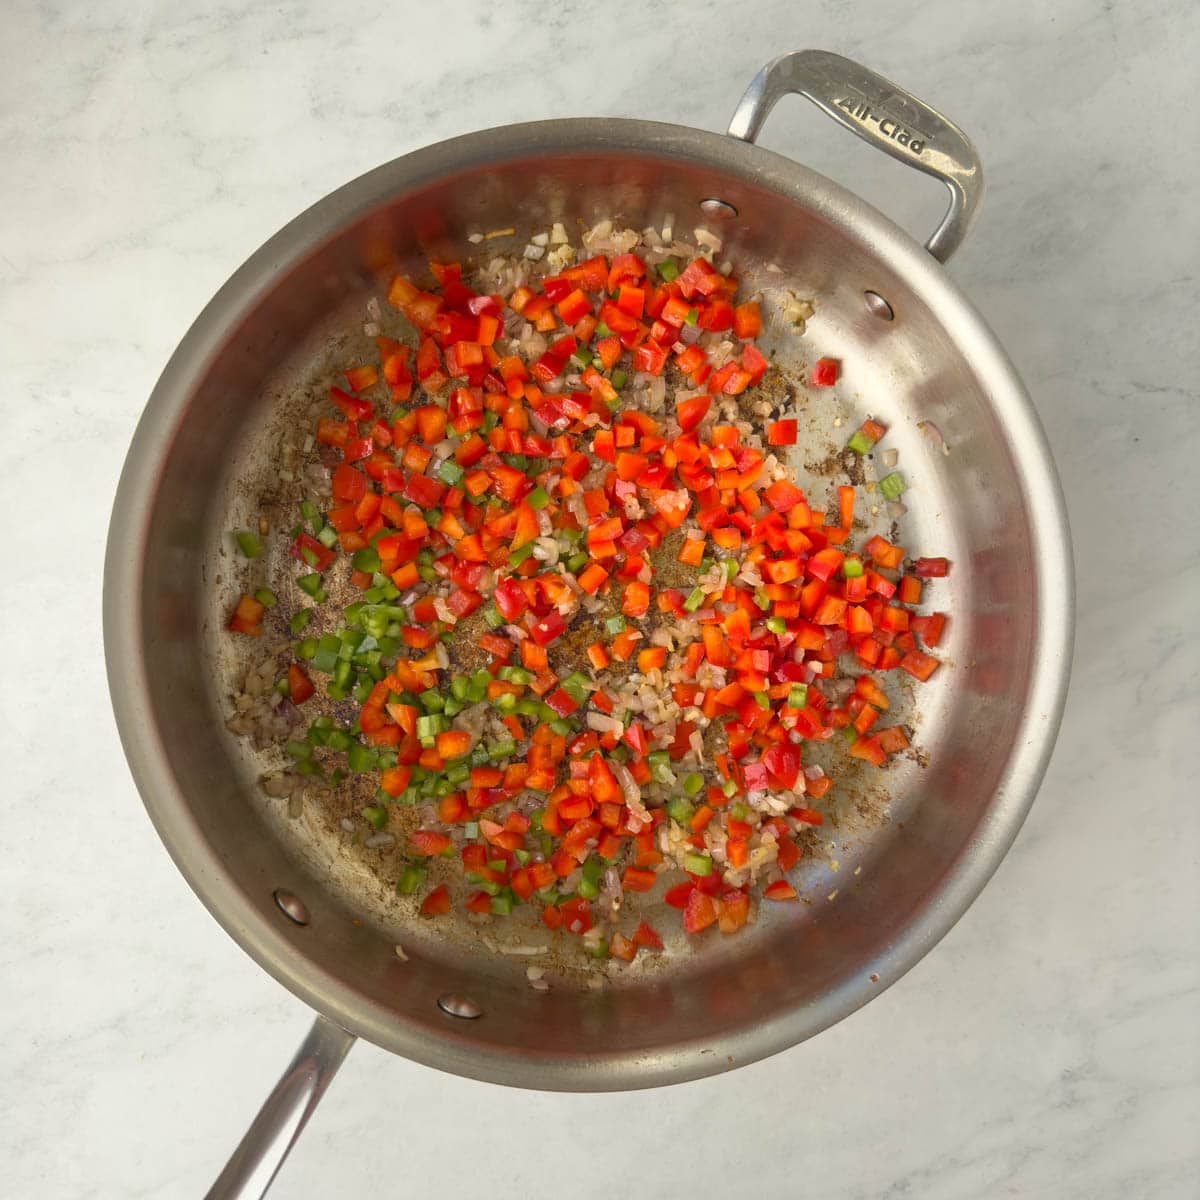 Sautéing red and green pepper in a saute pan.